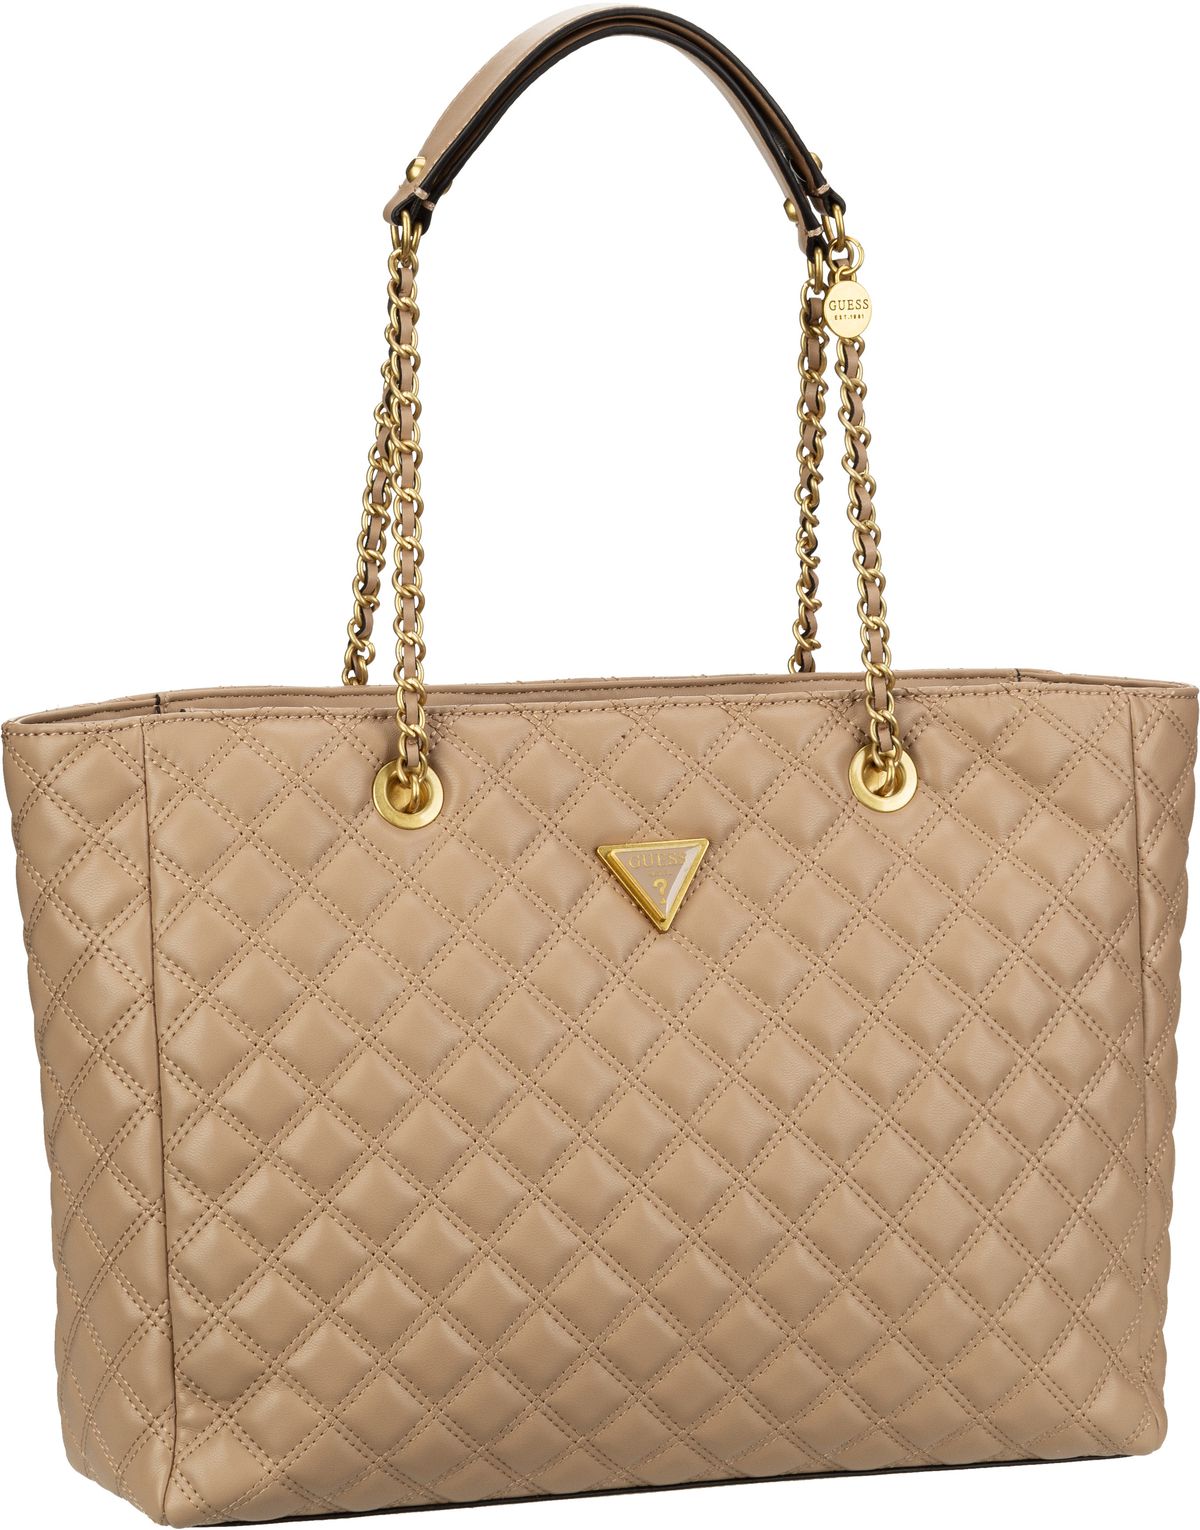 Guess Giully Tote - Beige